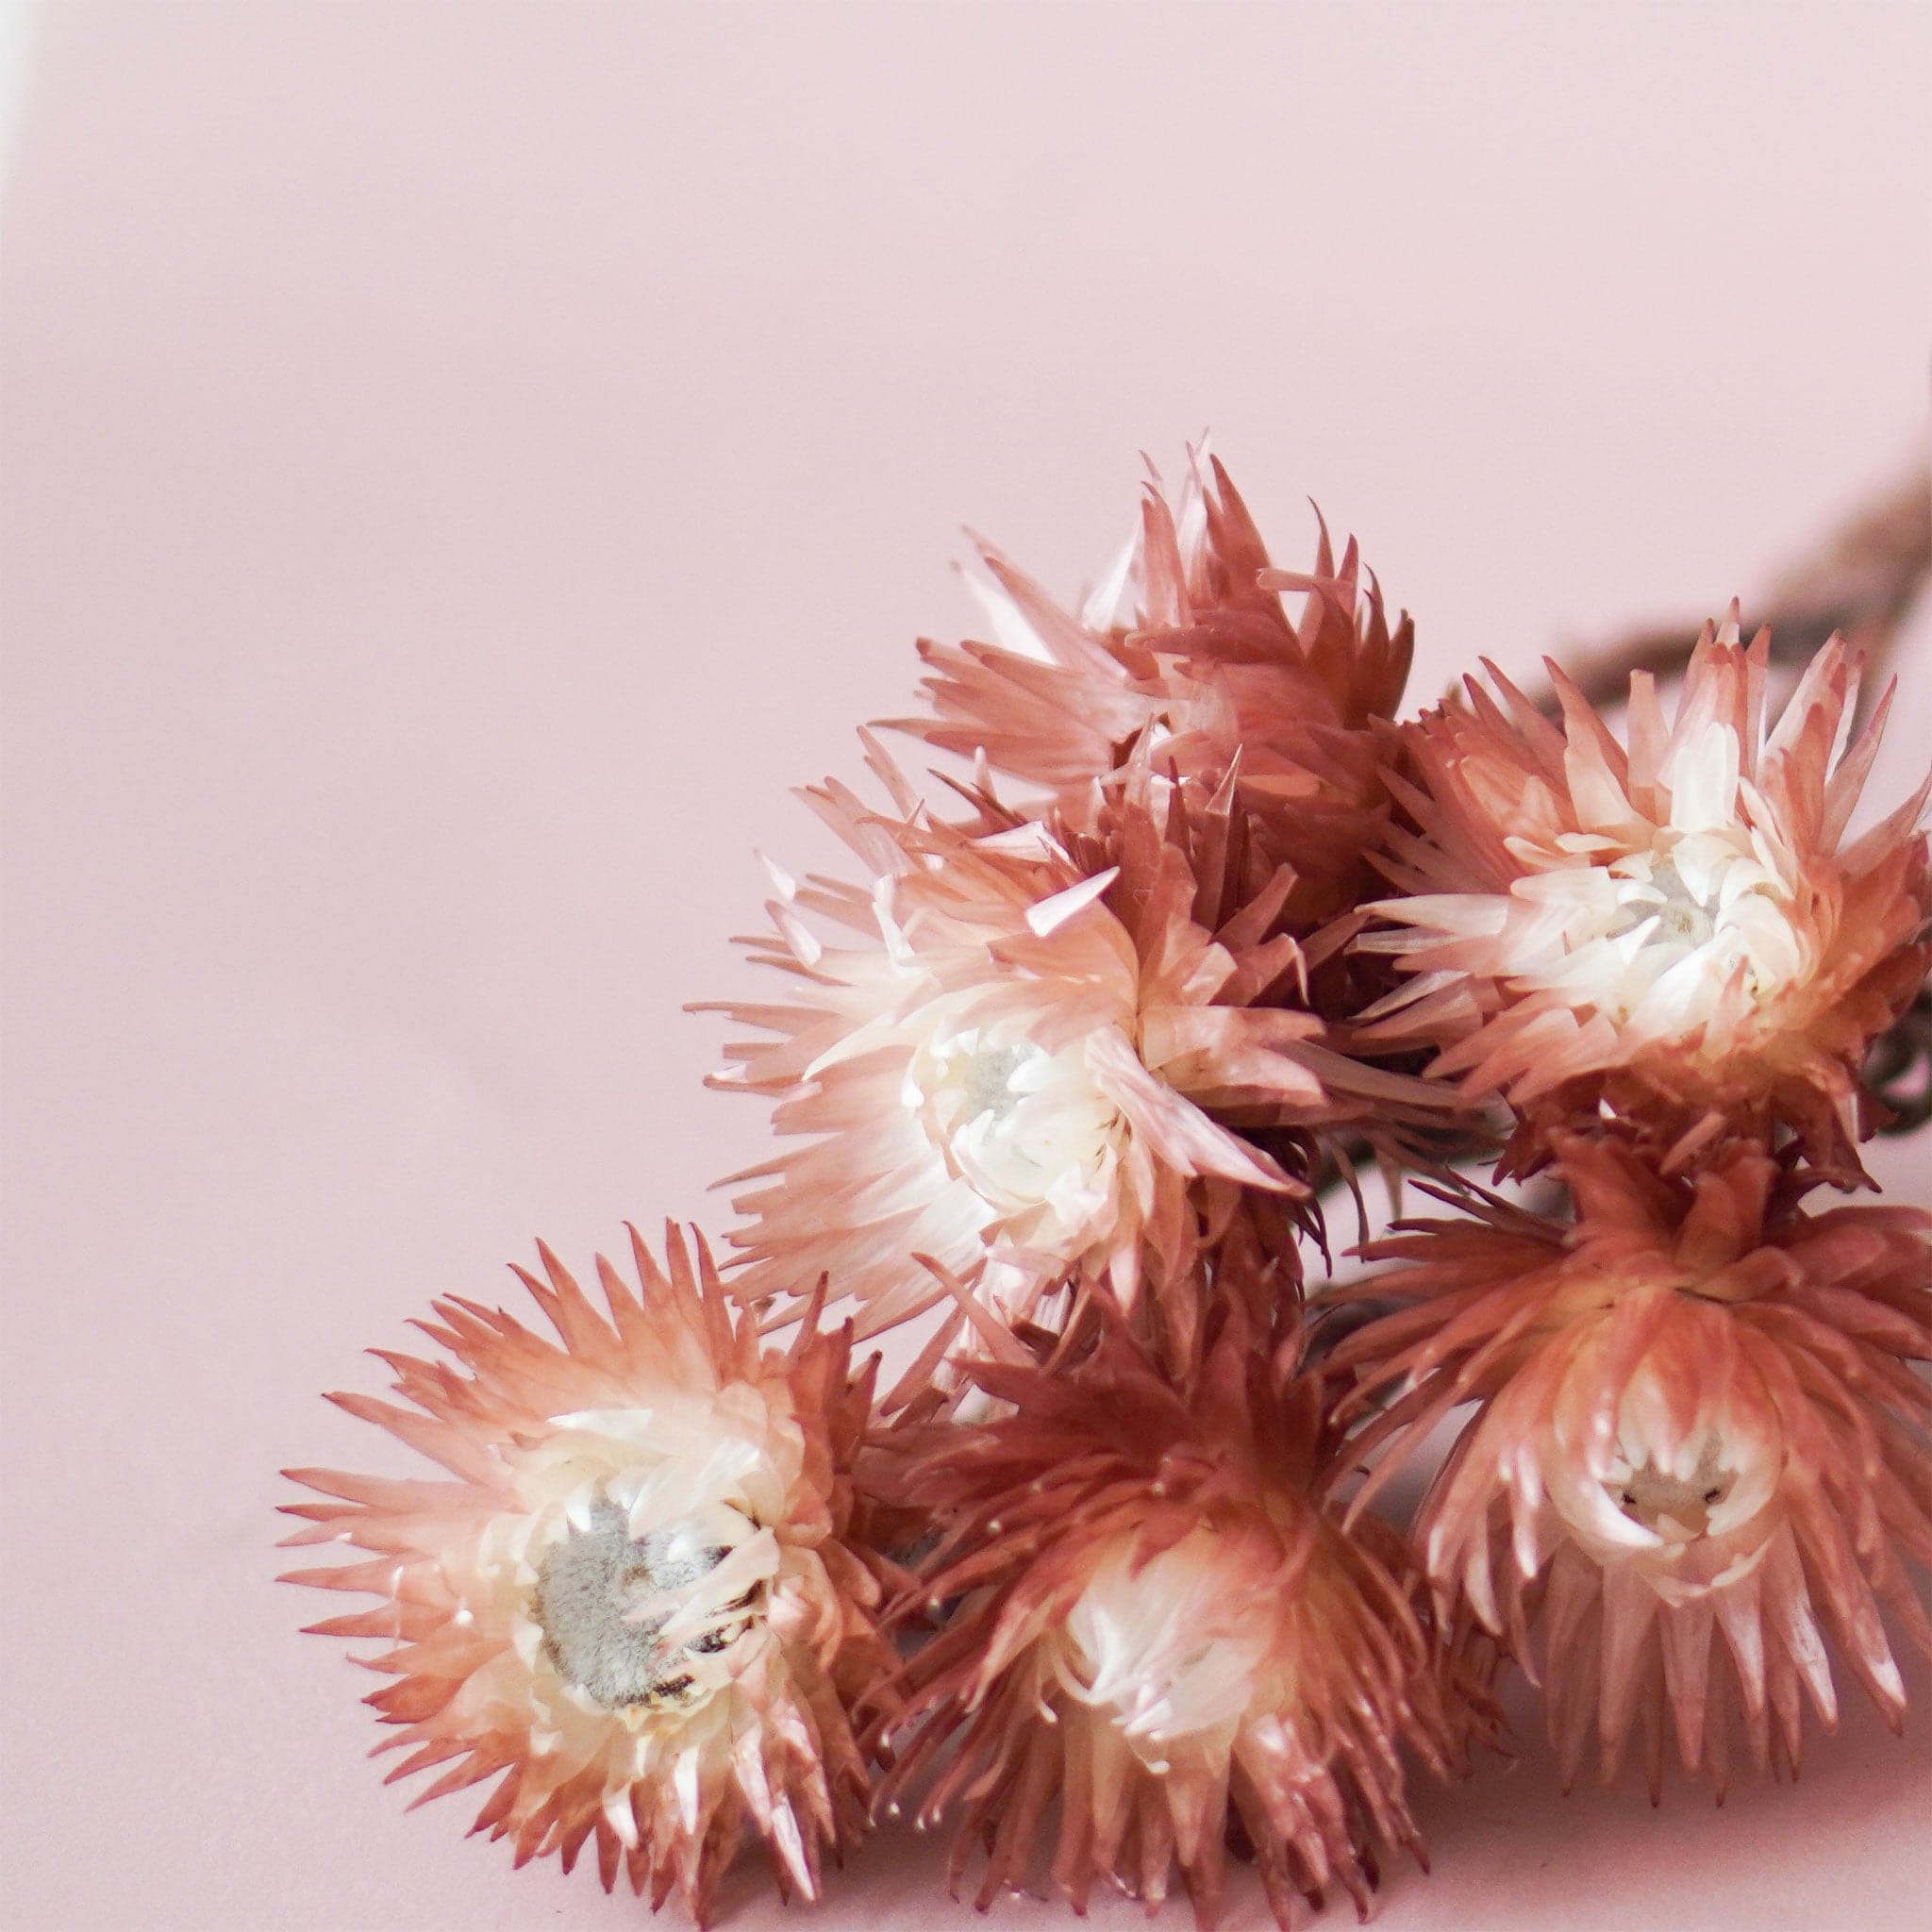 On a pink background is a bundle of dried pink daisies. 